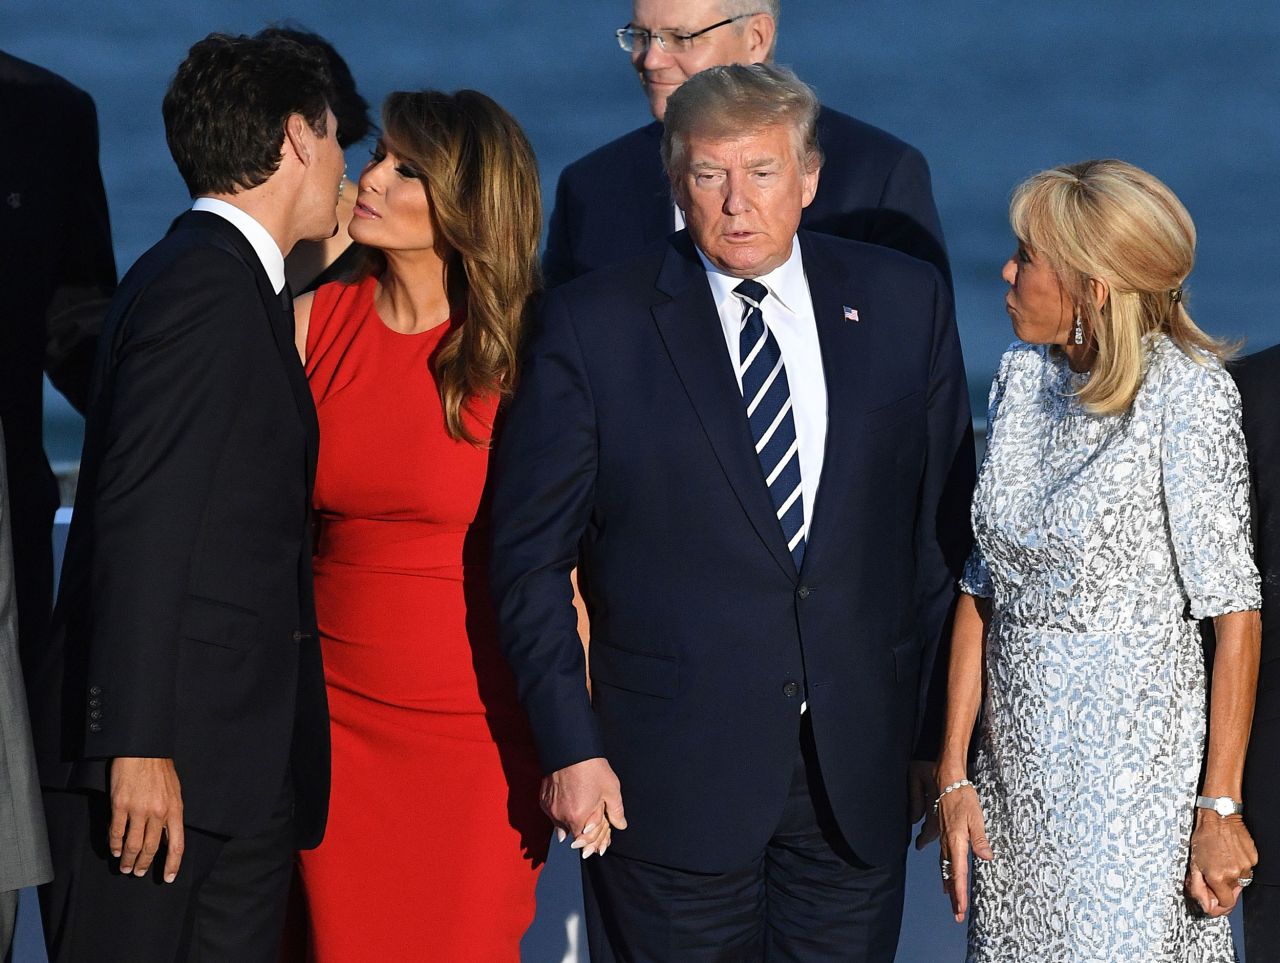 First lady Melania Trump greets Canadian Prime Minister Trudeau with a kiss on the cheek before a group photo at the G7 summit in Biarritz.